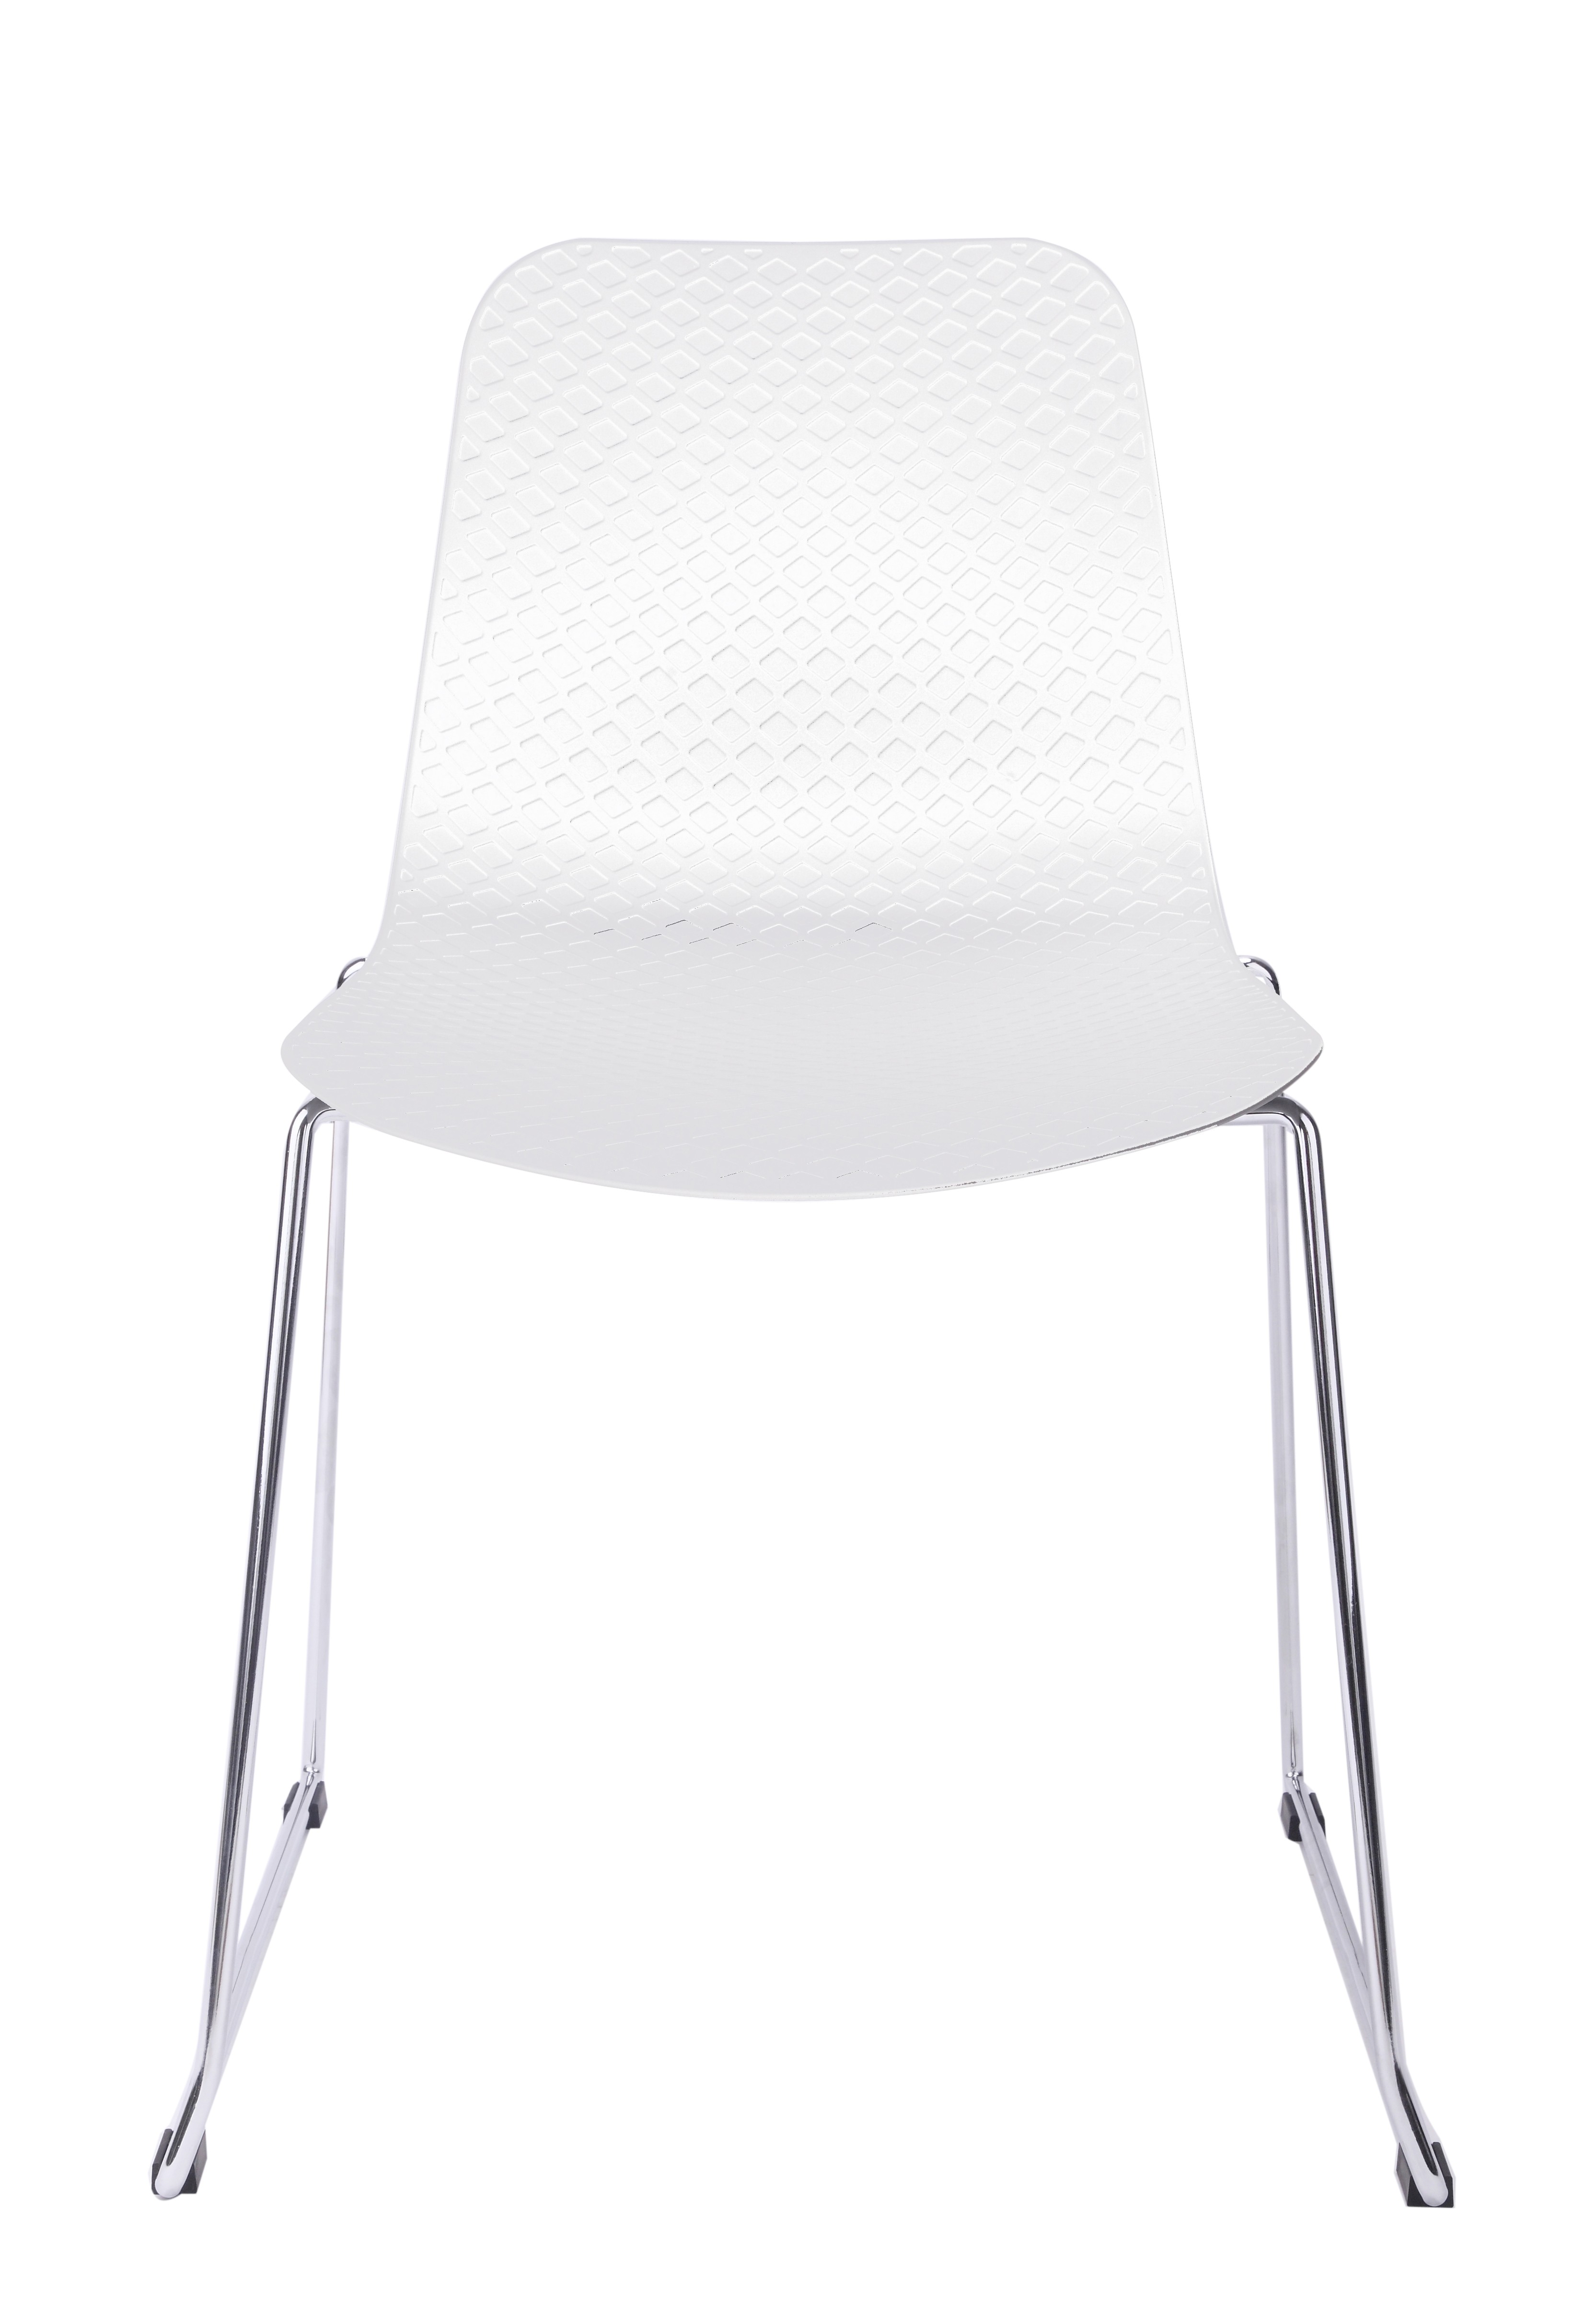 Chair Piccadilly White Plastic Steel 